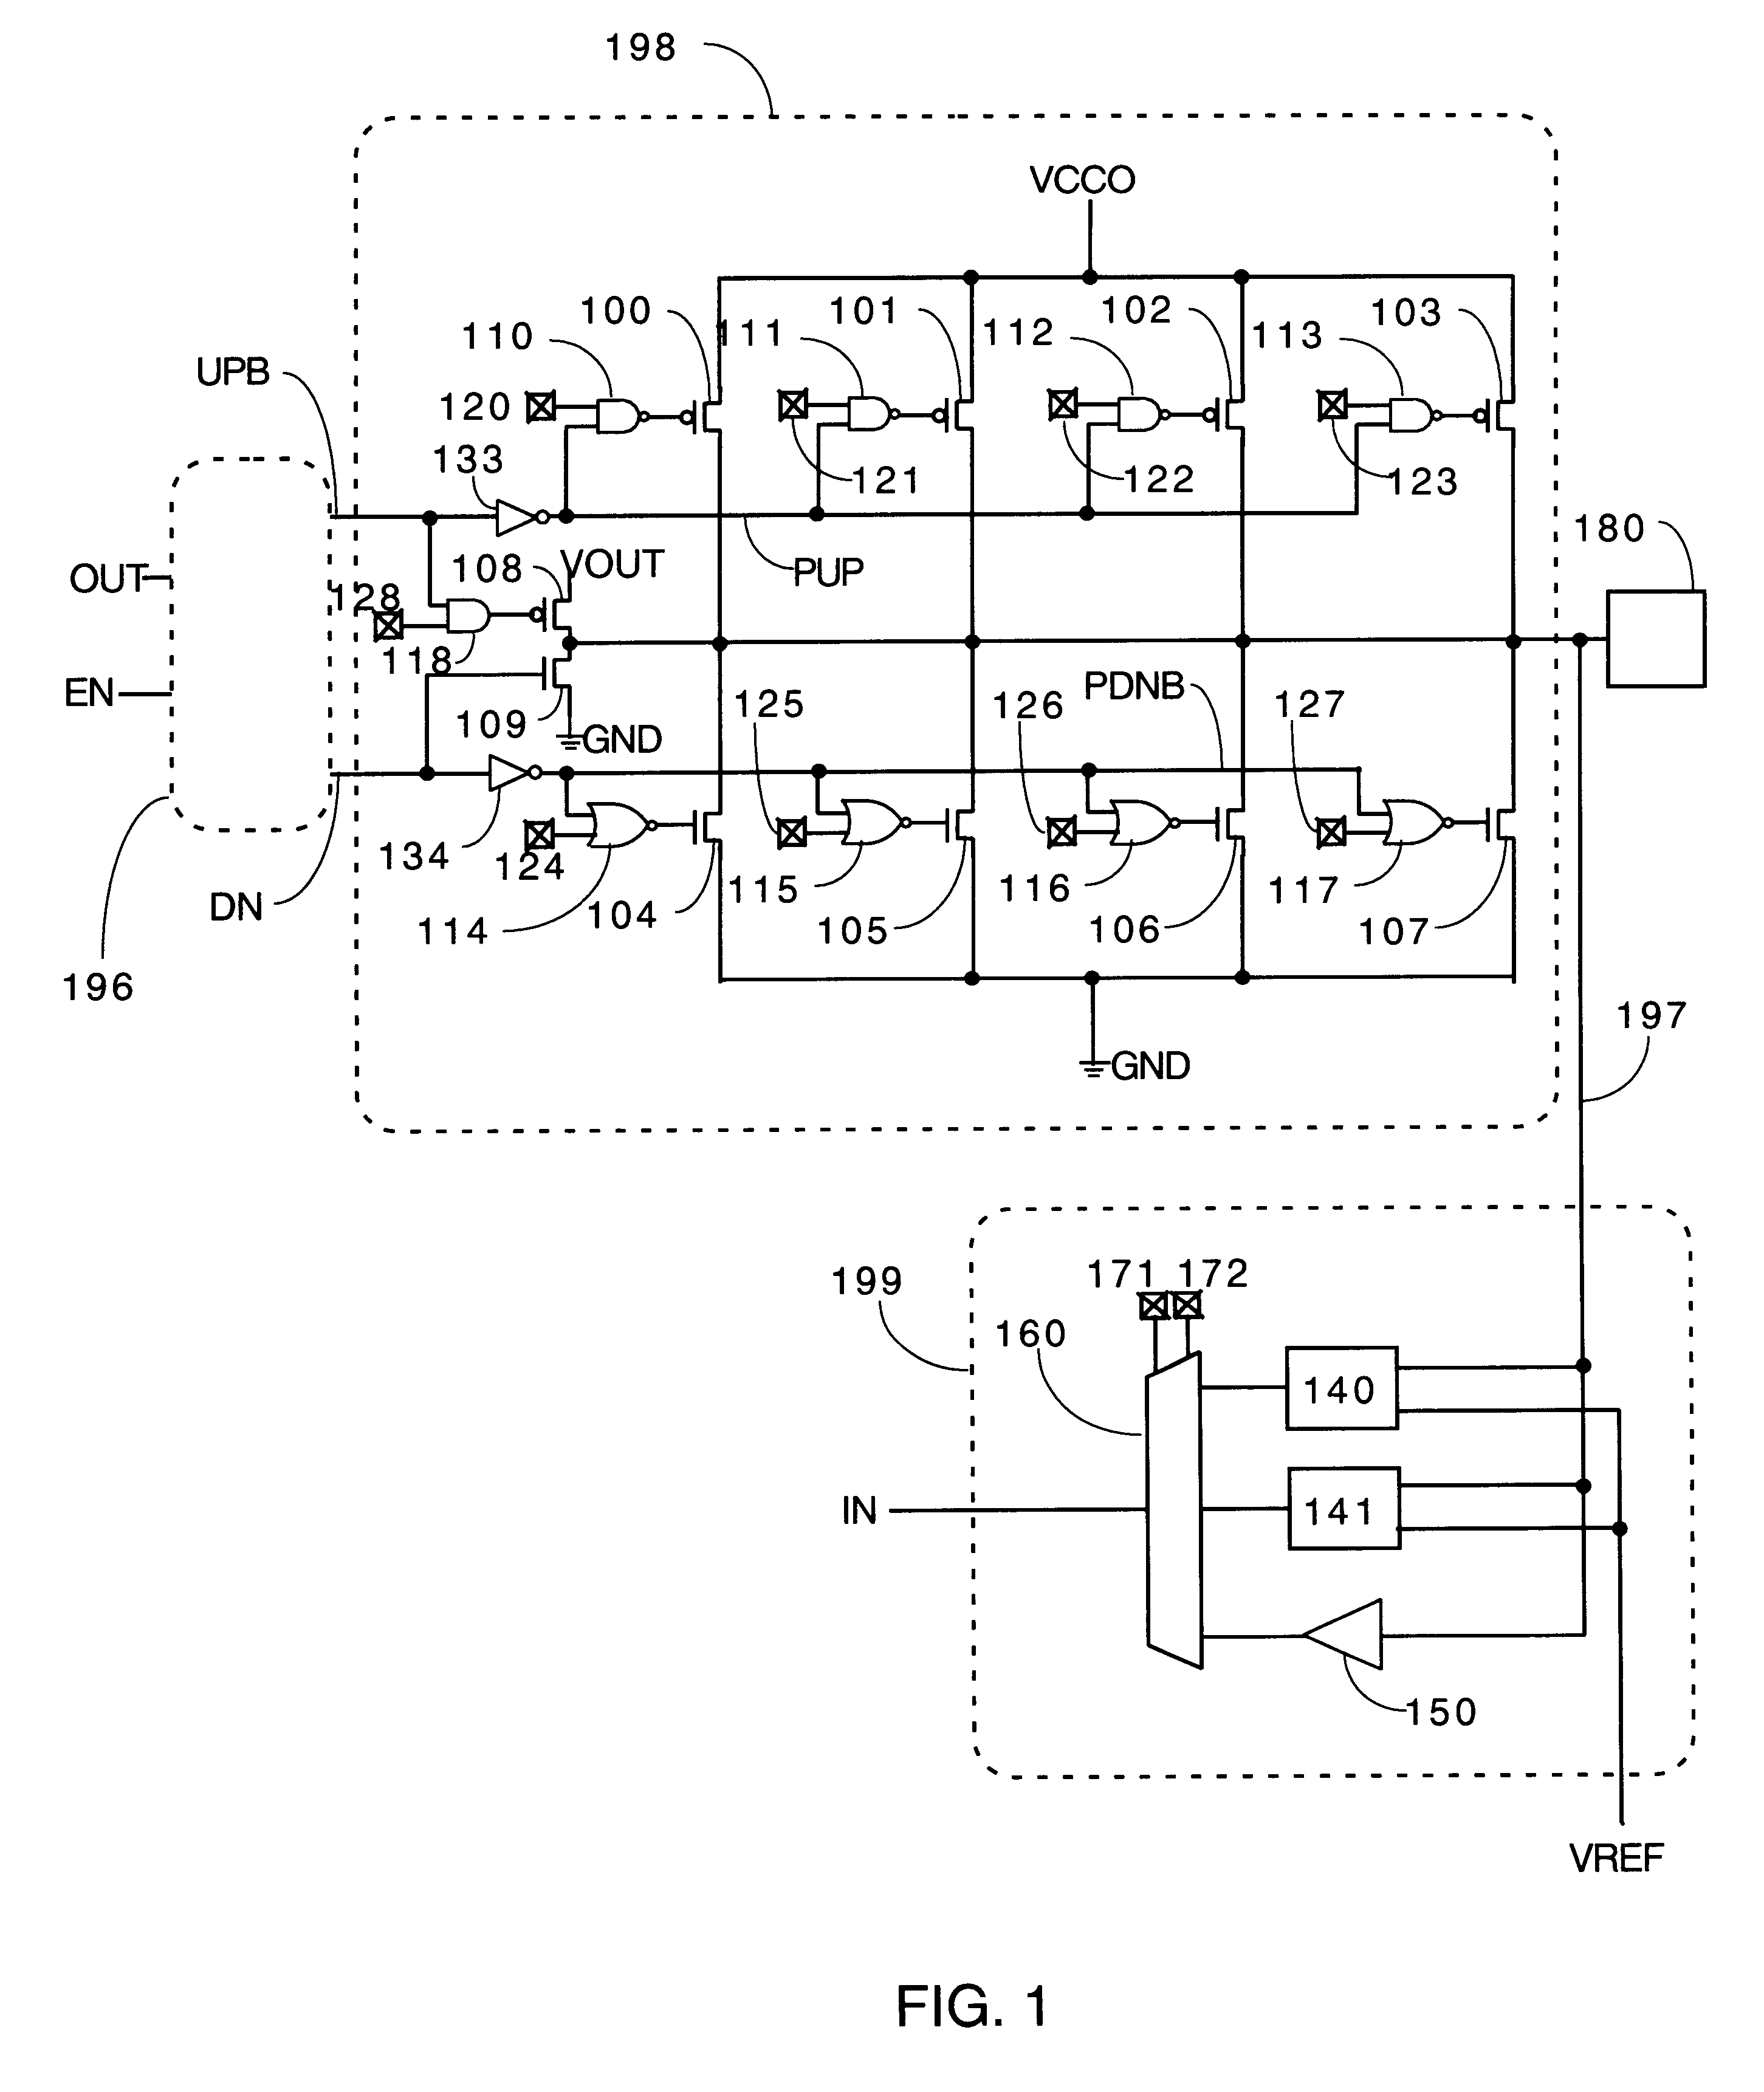 FPGA with a plurality of input reference voltage levels grouped into sets